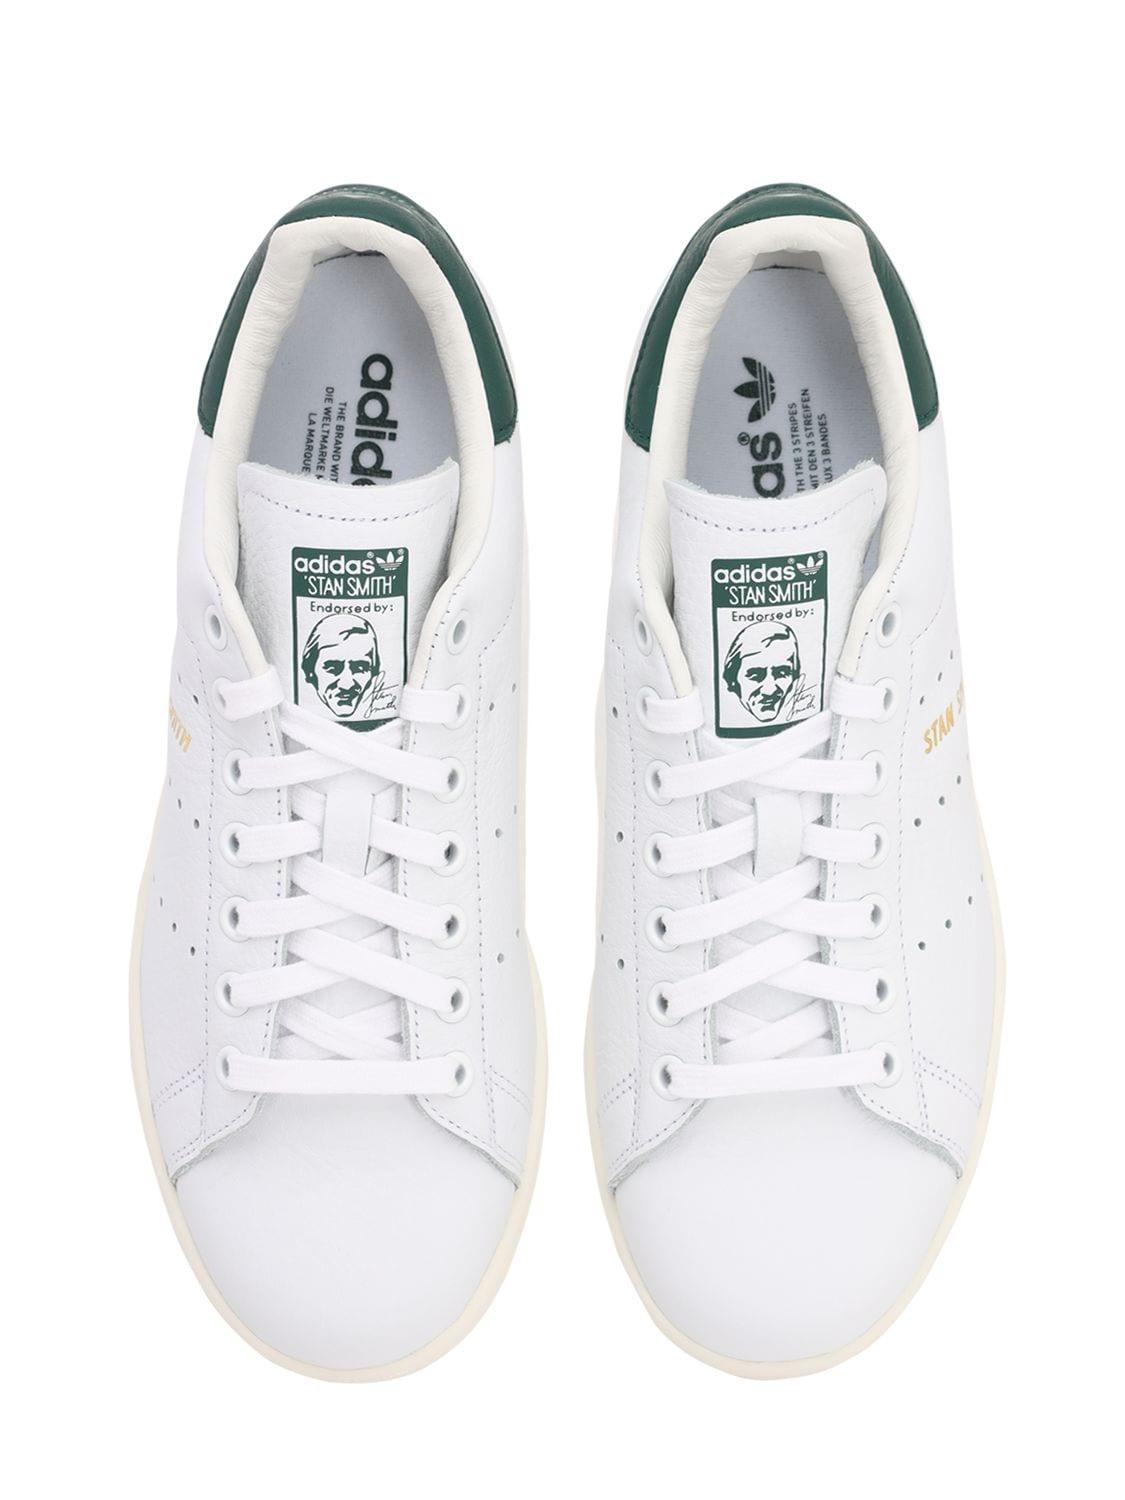 adidas Originals Stan Smith Leather Sneakers in White,Green (White) - Lyst